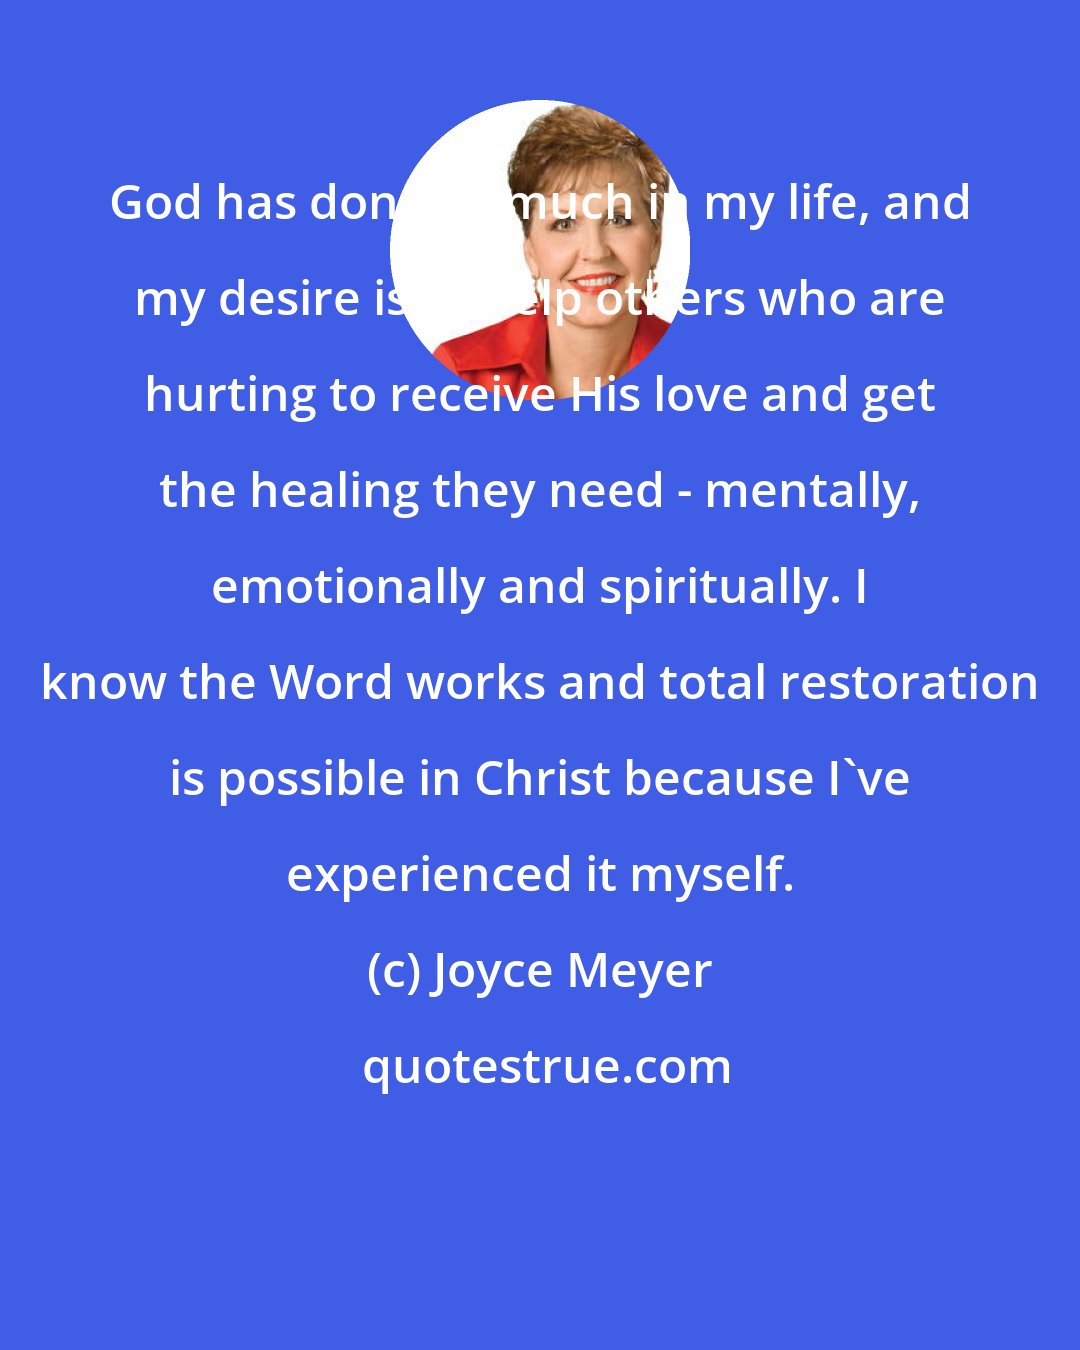 Joyce Meyer: God has done so much in my life, and my desire is to help others who are hurting to receive His love and get the healing they need - mentally, emotionally and spiritually. I know the Word works and total restoration is possible in Christ because I've experienced it myself.